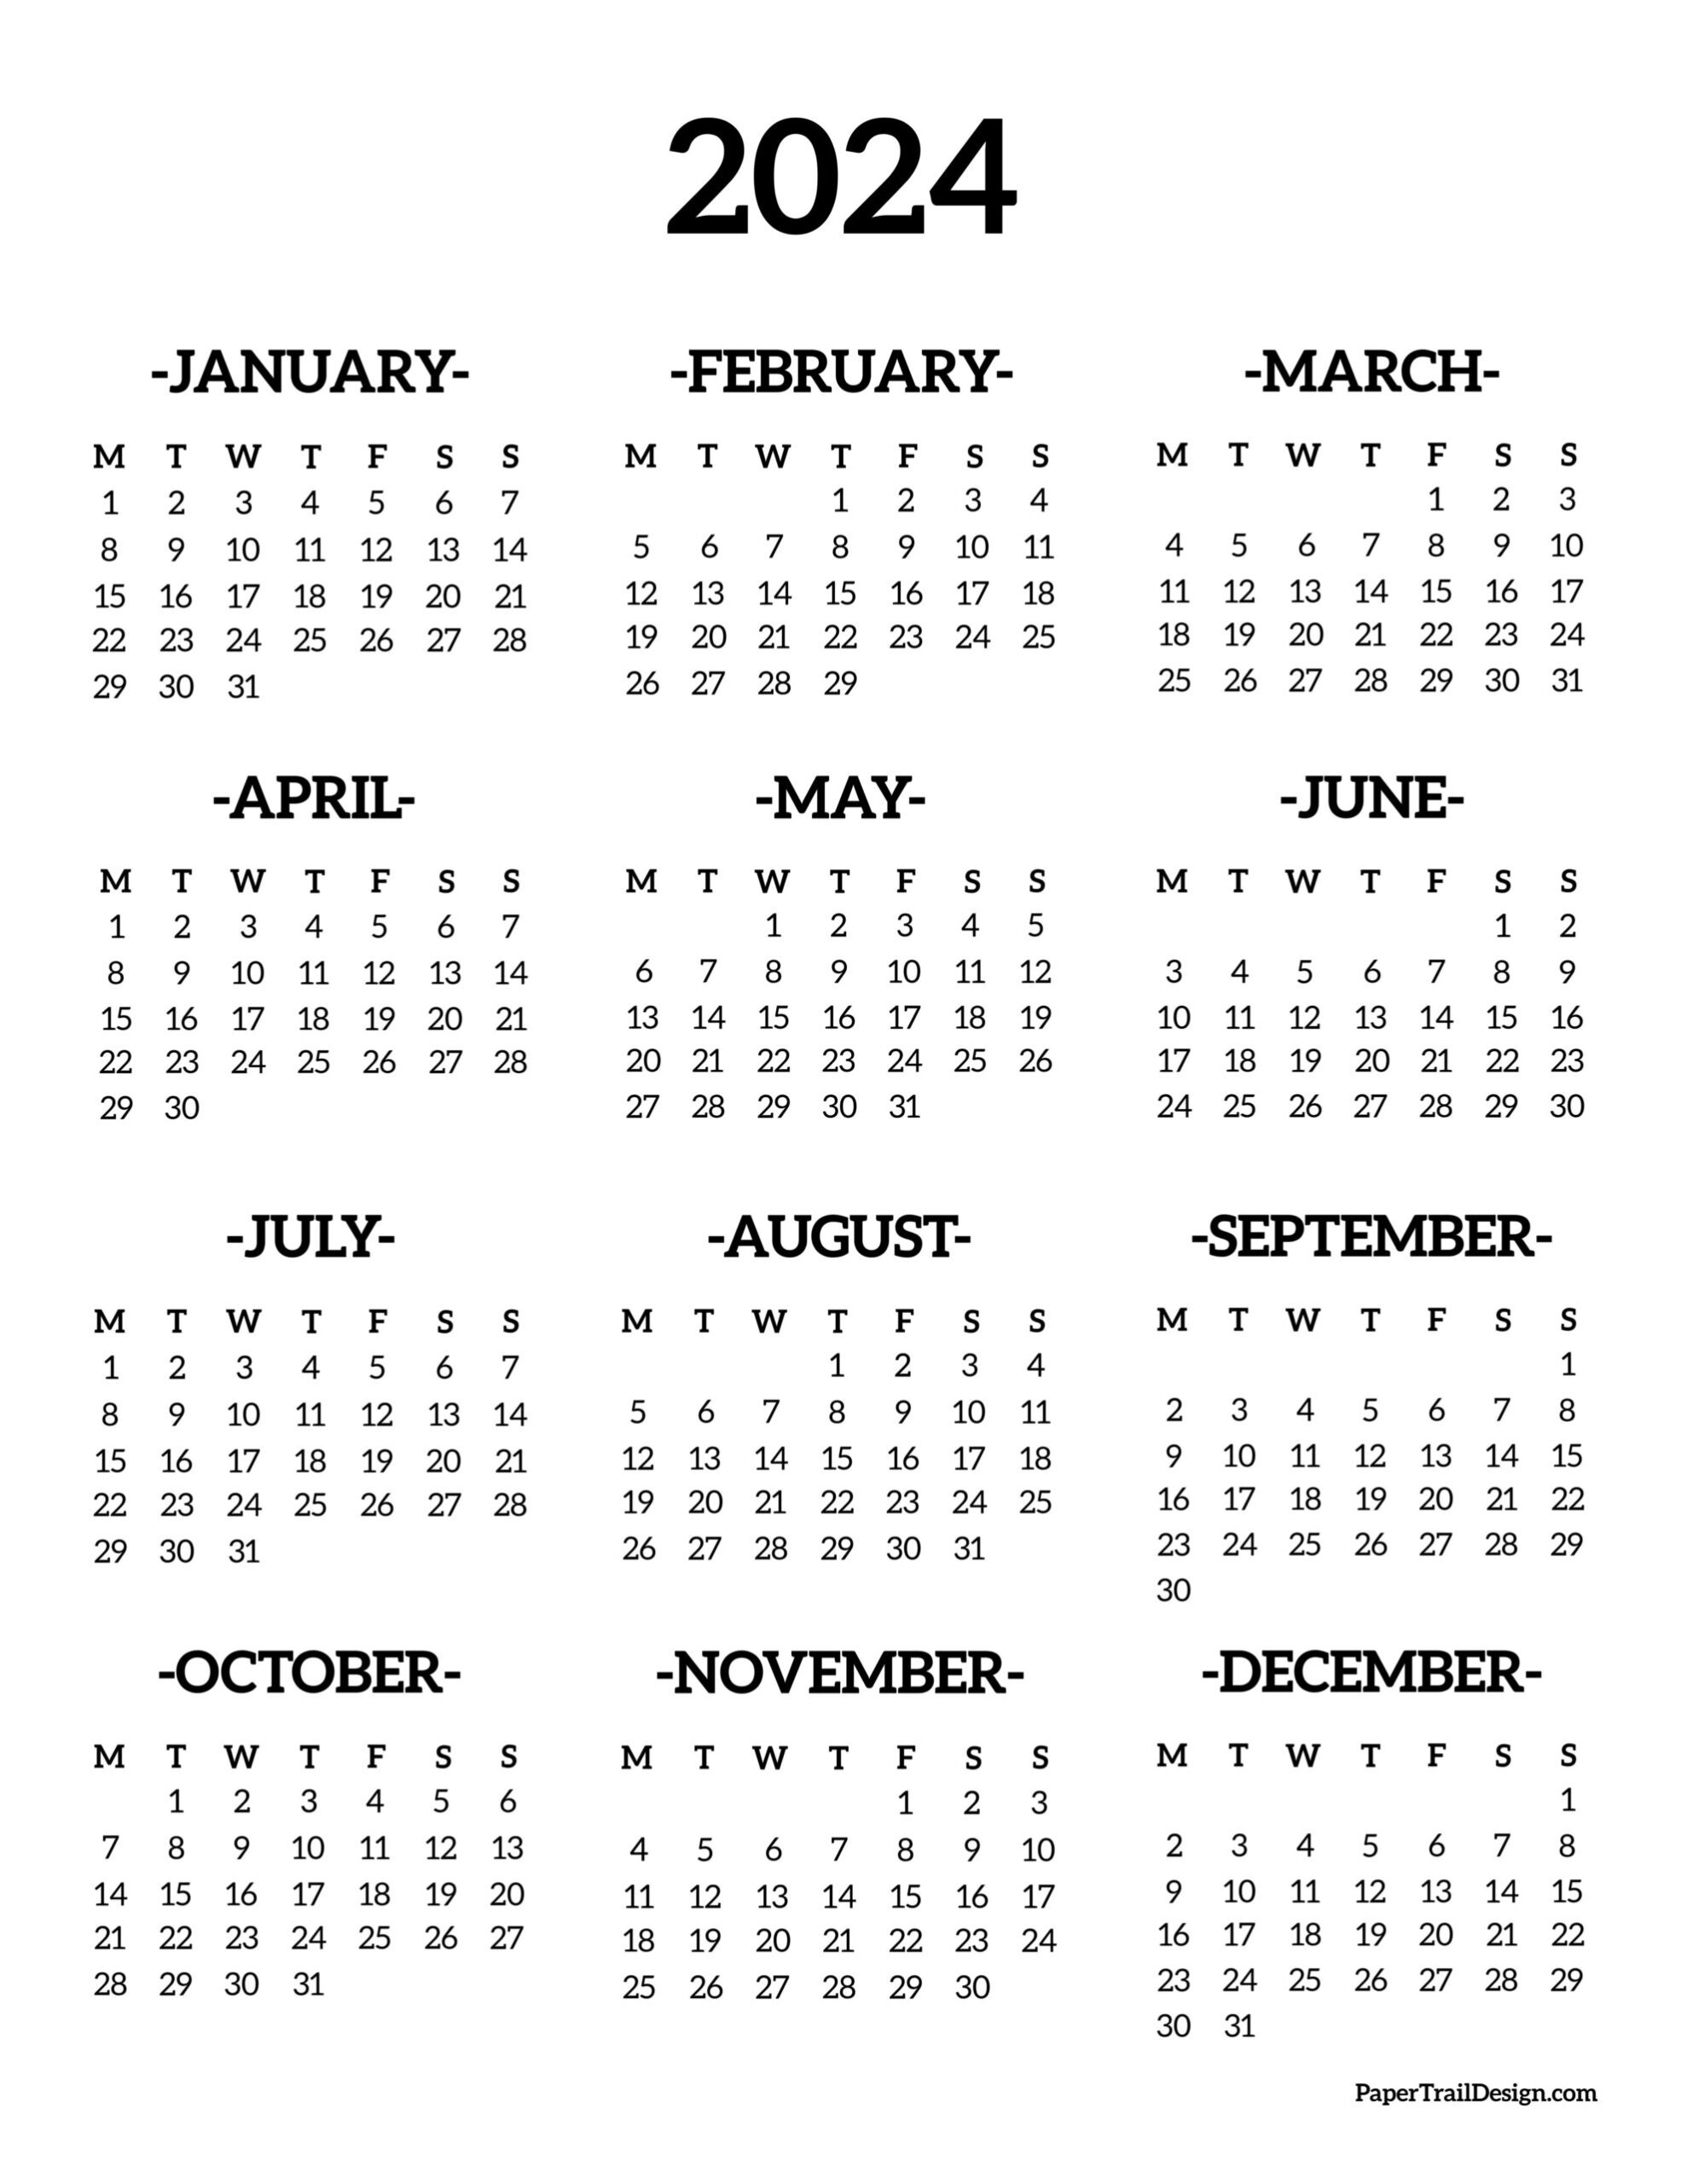 2024 Monday Start Calendar - One Page - Paper Trail Design in Free Printable Calendar 2024 Monday Star